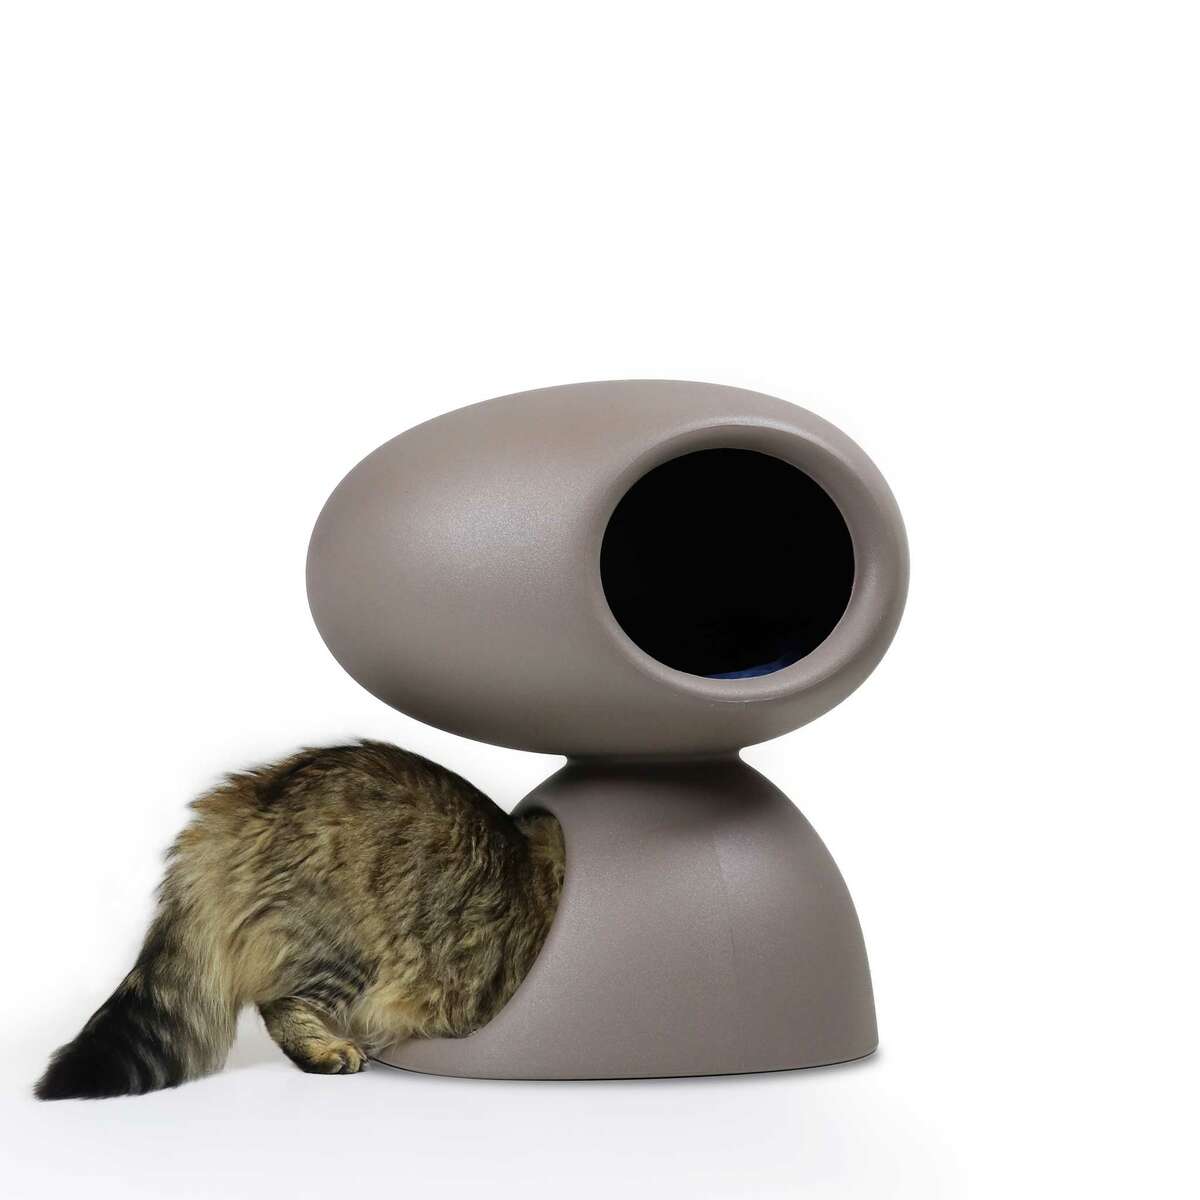 Cat Cave is a project of Stefano Giovannoni, which is a joint venture of Qeeboo and United Pets, a specialized company dealing with pets.